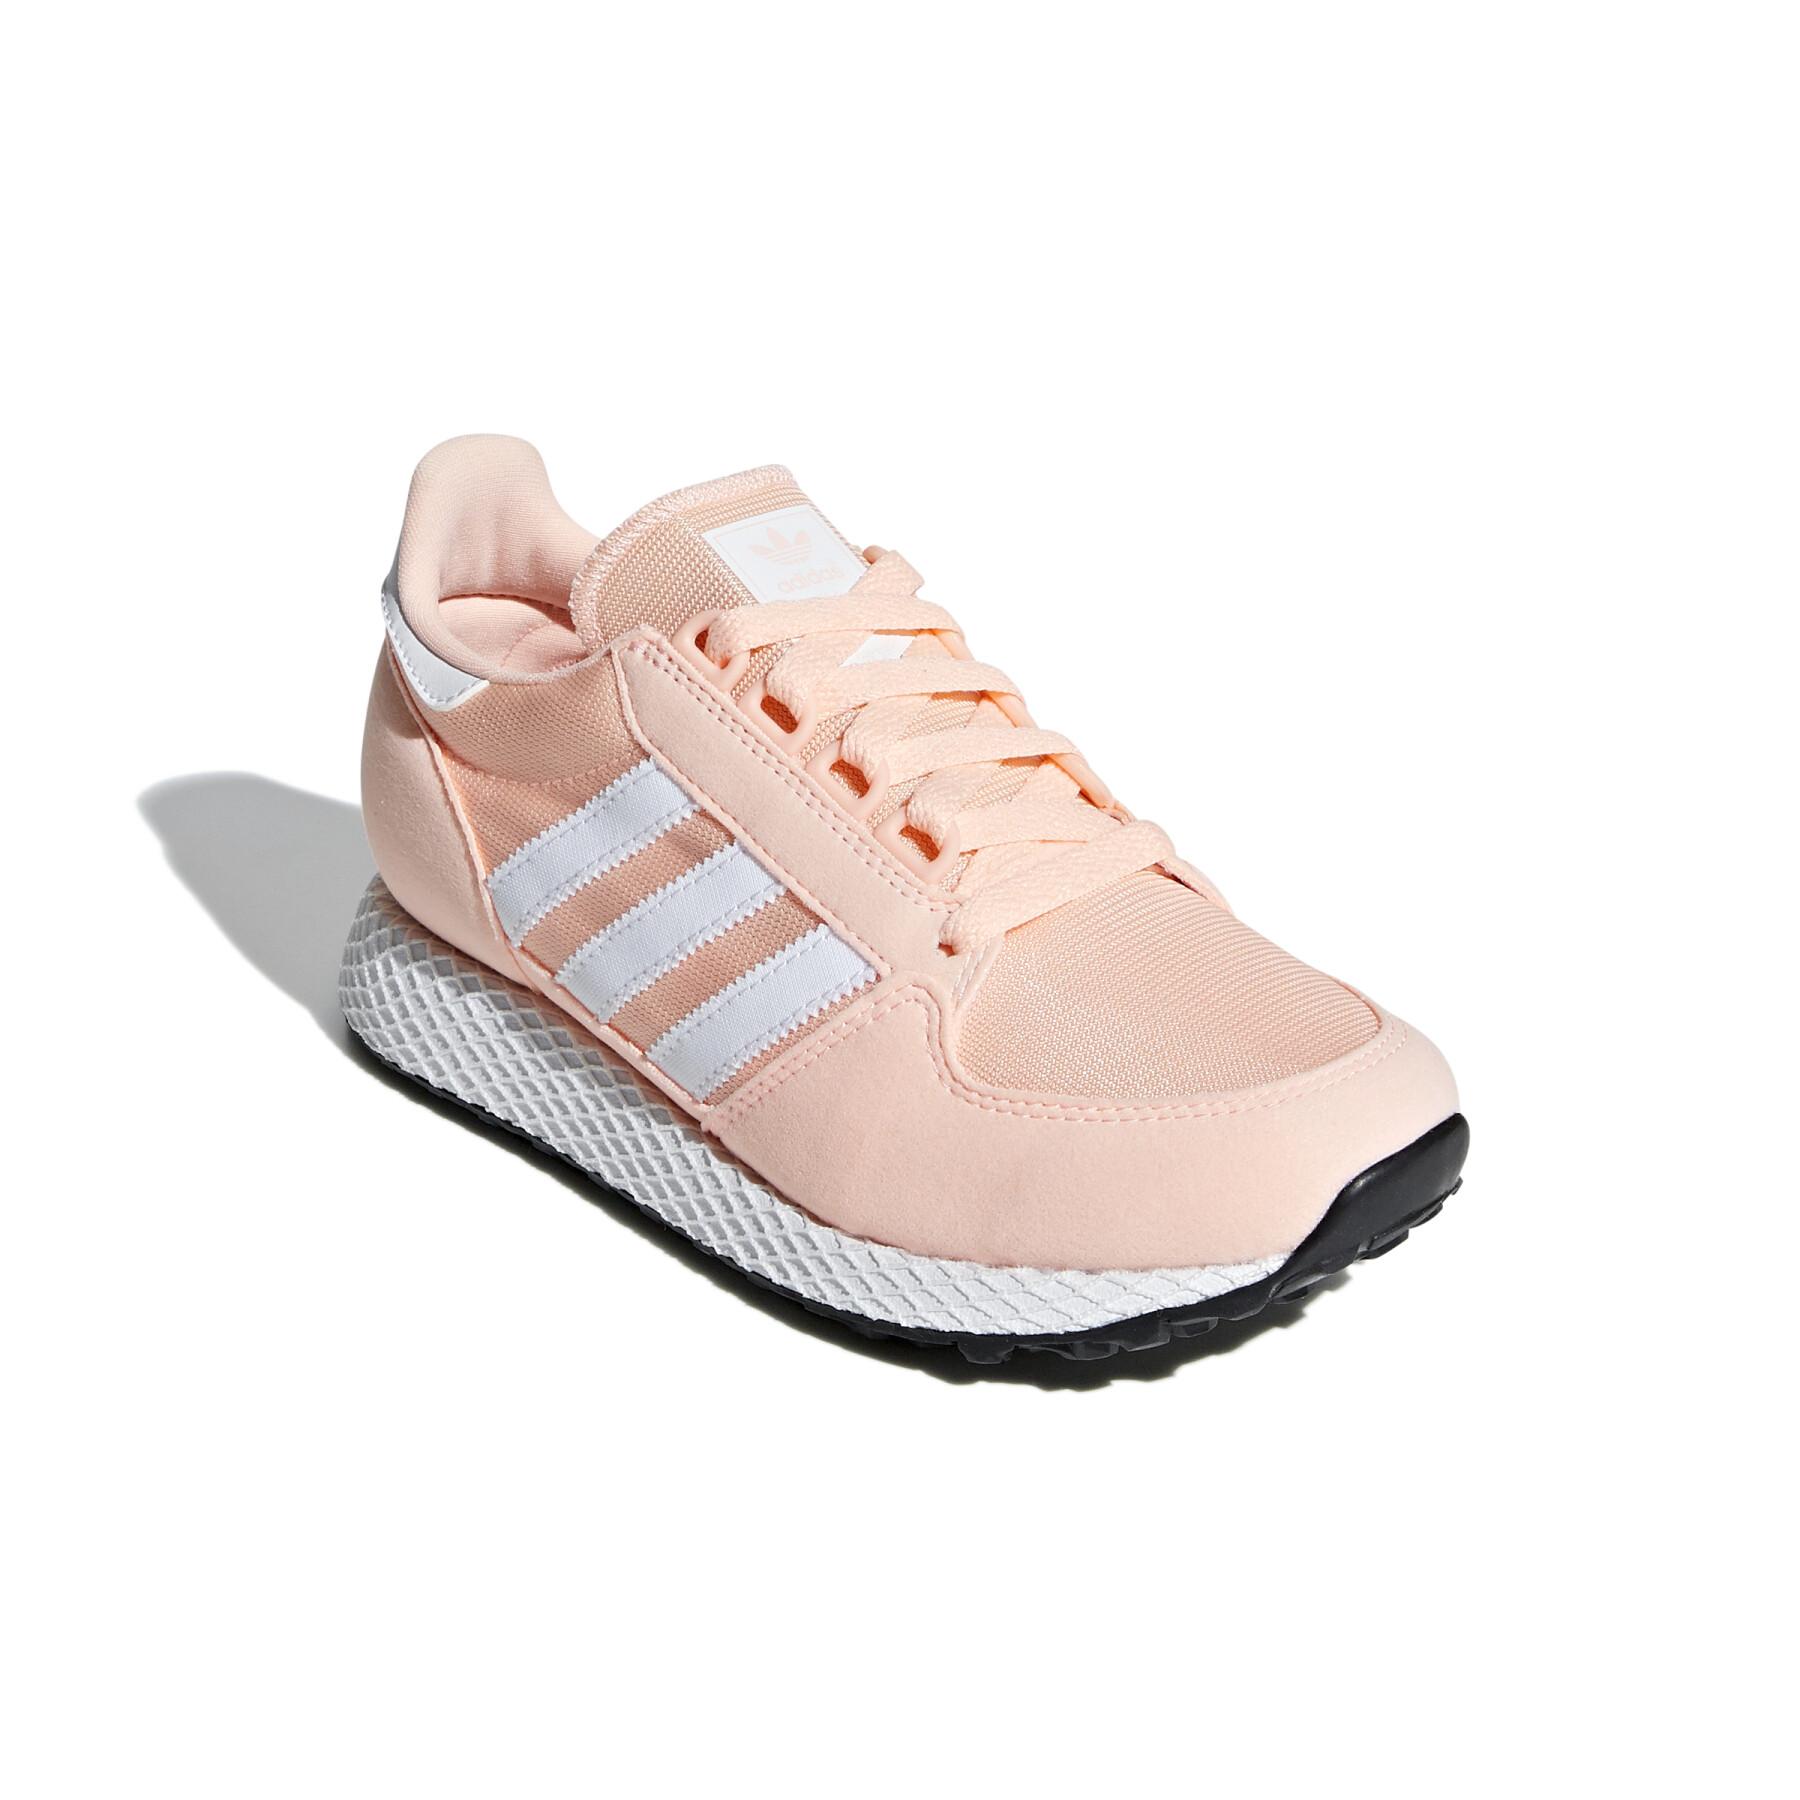 Kinder sneakers adidas Forest Grove